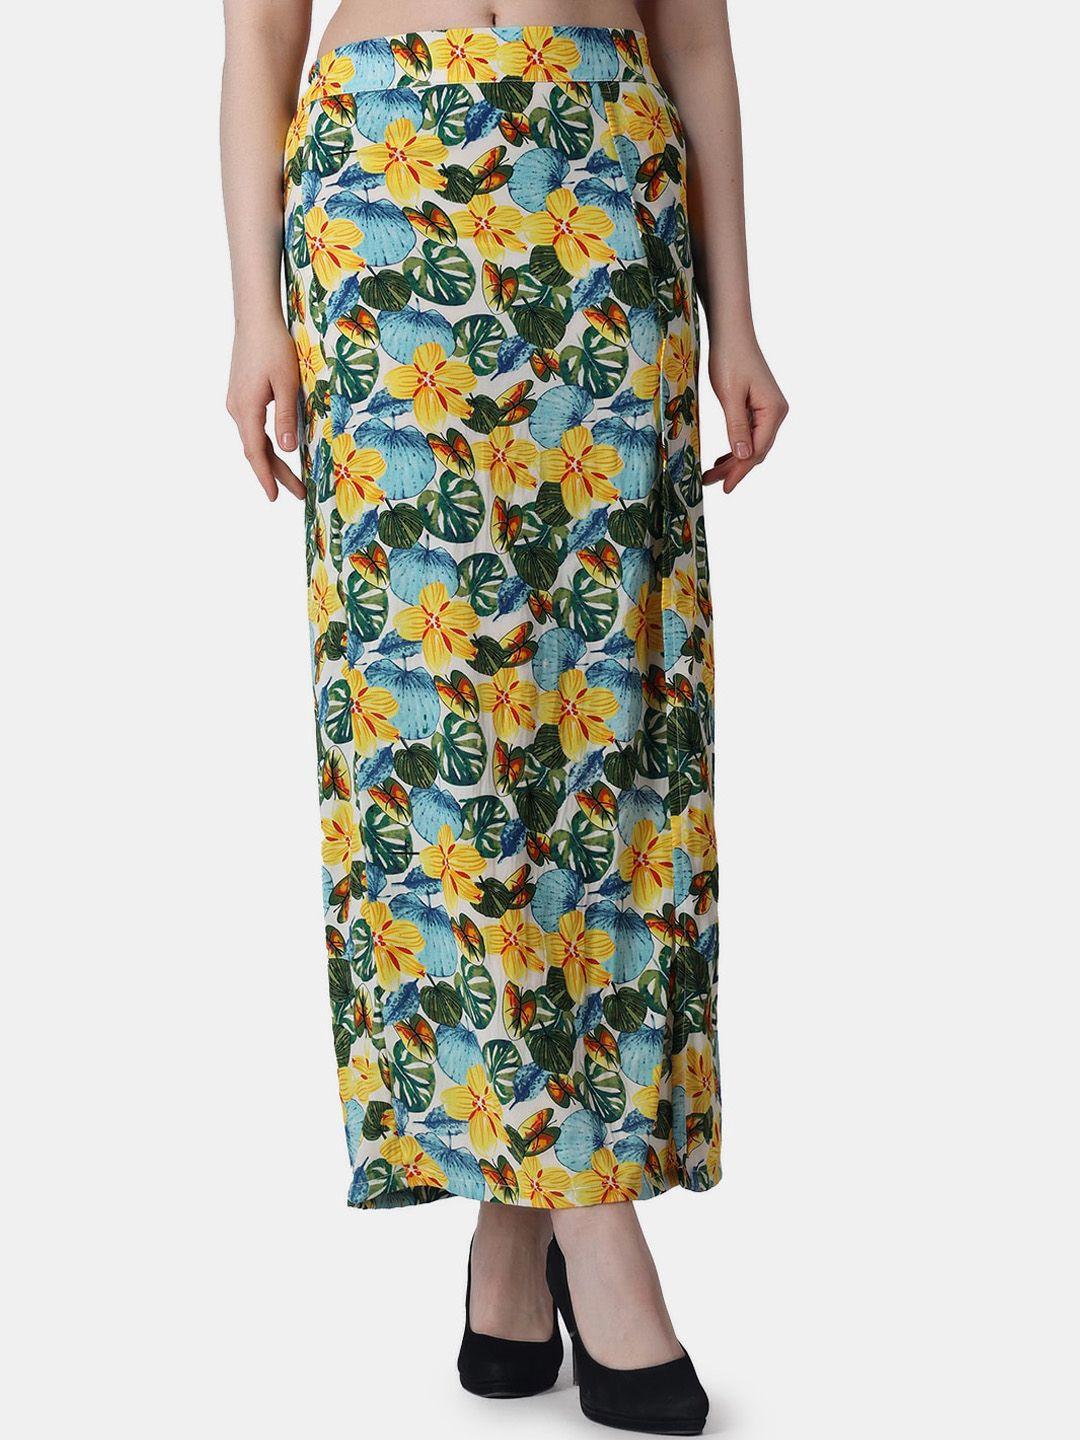 popwings floral printed maxi straight skirt wit side slit